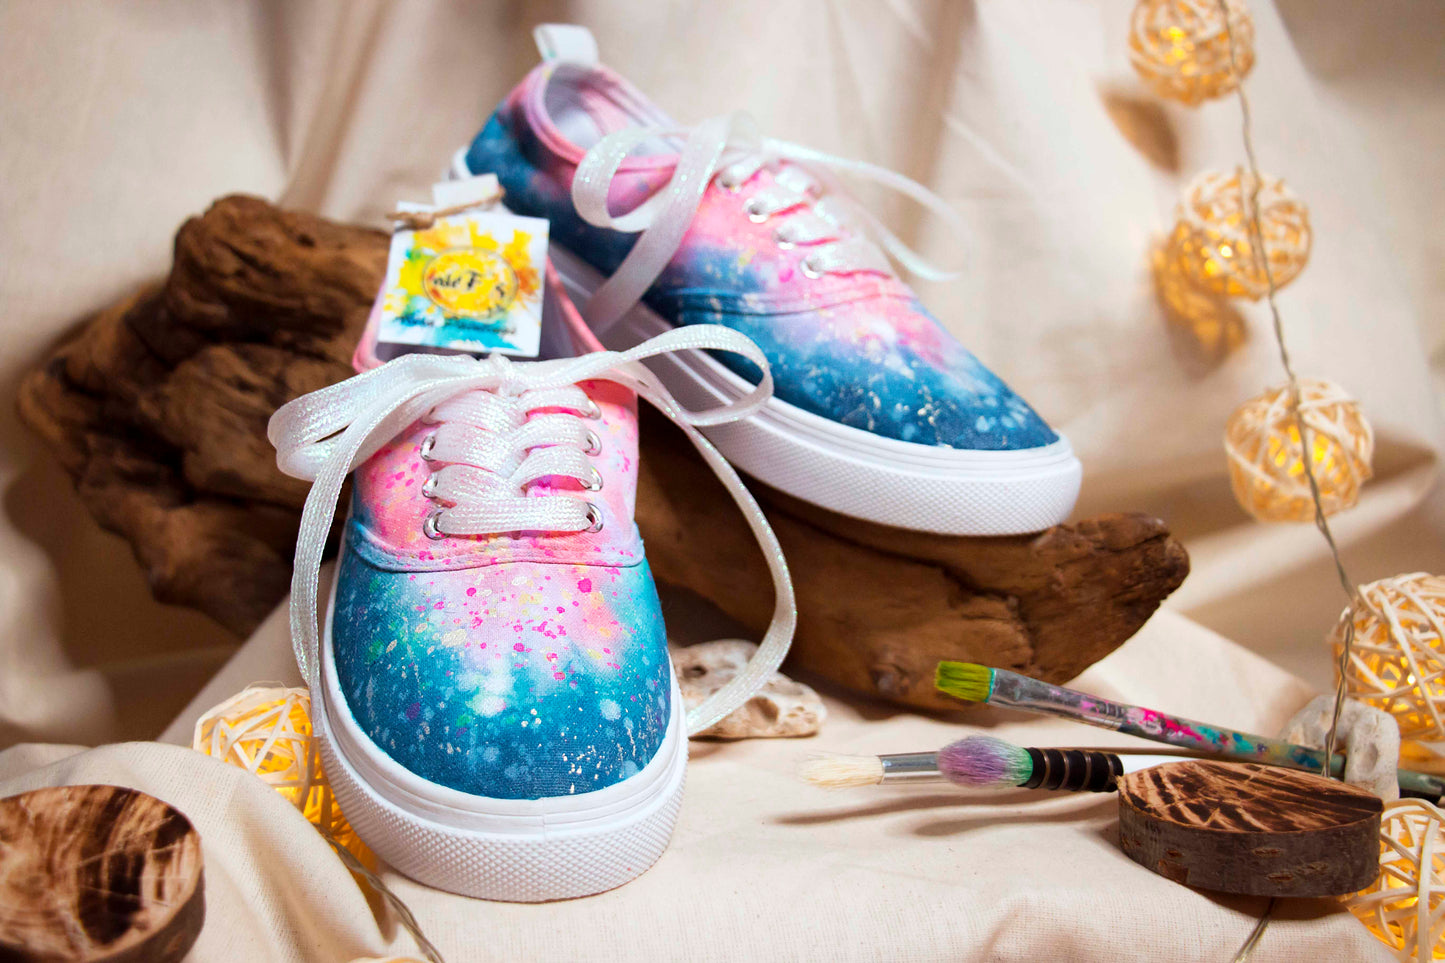 Tenisi Pictati, Painted Sneakers, Pictura Manuala Tenisi, handmade shoes, Everyday shoes, Woman Fashion, customized shoes, Holi, Holi Sneakers, Nature, Meaningful painting, look inside, Splash, Splashes